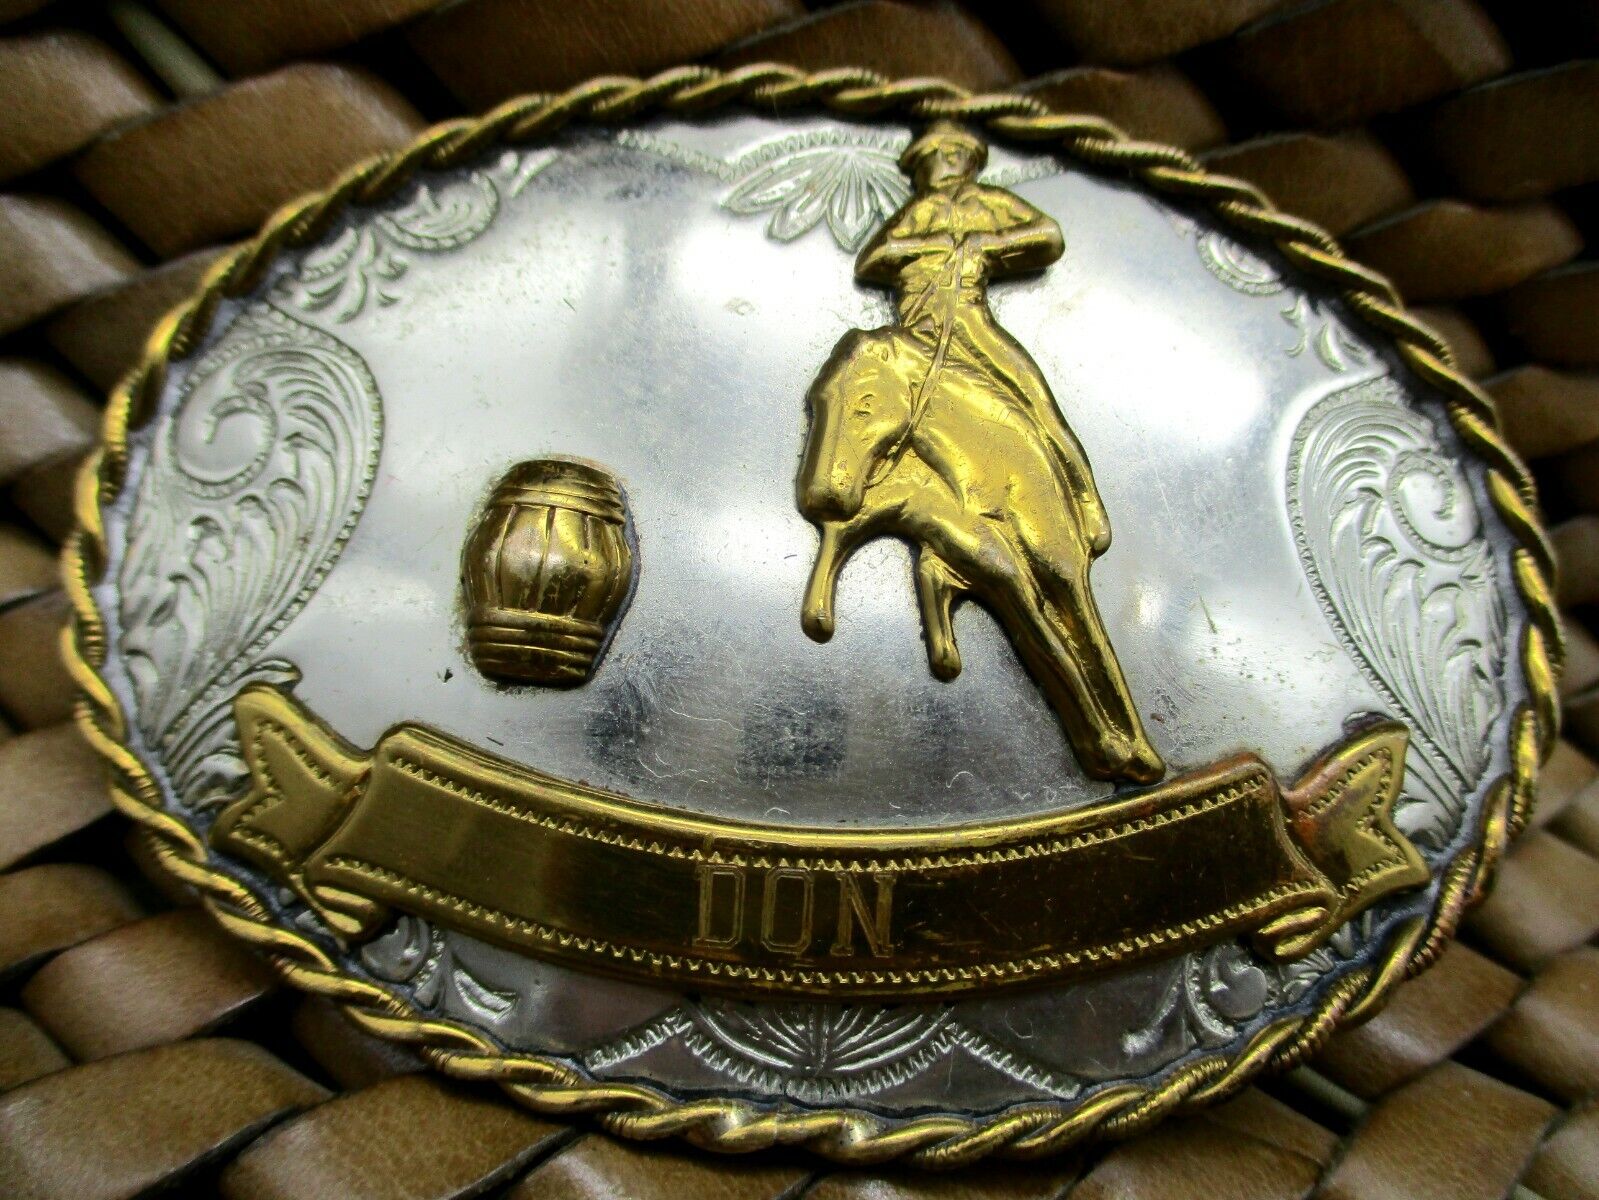 Hey DON We found your VINTAGE BARREL RACING Western BELT BUCKLE Do you know him?